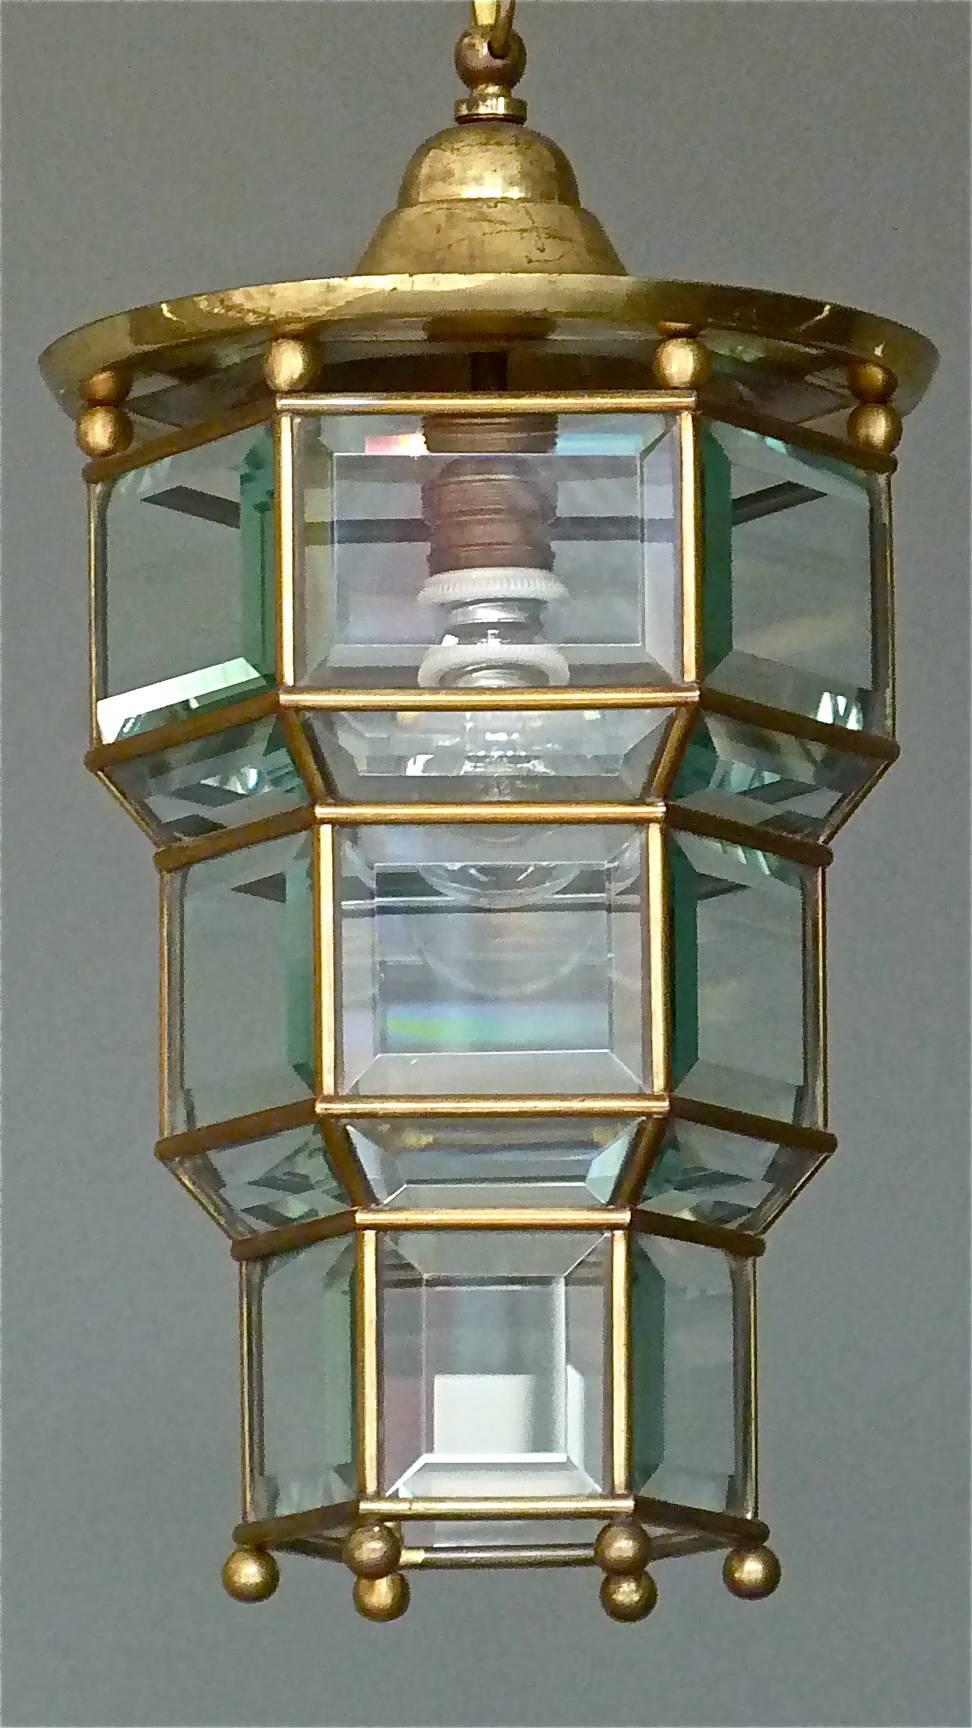 Amazing Adolf Loos / Josef Hoffmann Style Vienna Secession Pendant Lamp, Austria, circa 1905-1910. Antique patinated brass metal light corpus with hand-cut beveled crystal glass sections, possibly from Lobmeyr. It has one porcelain / brass fitting